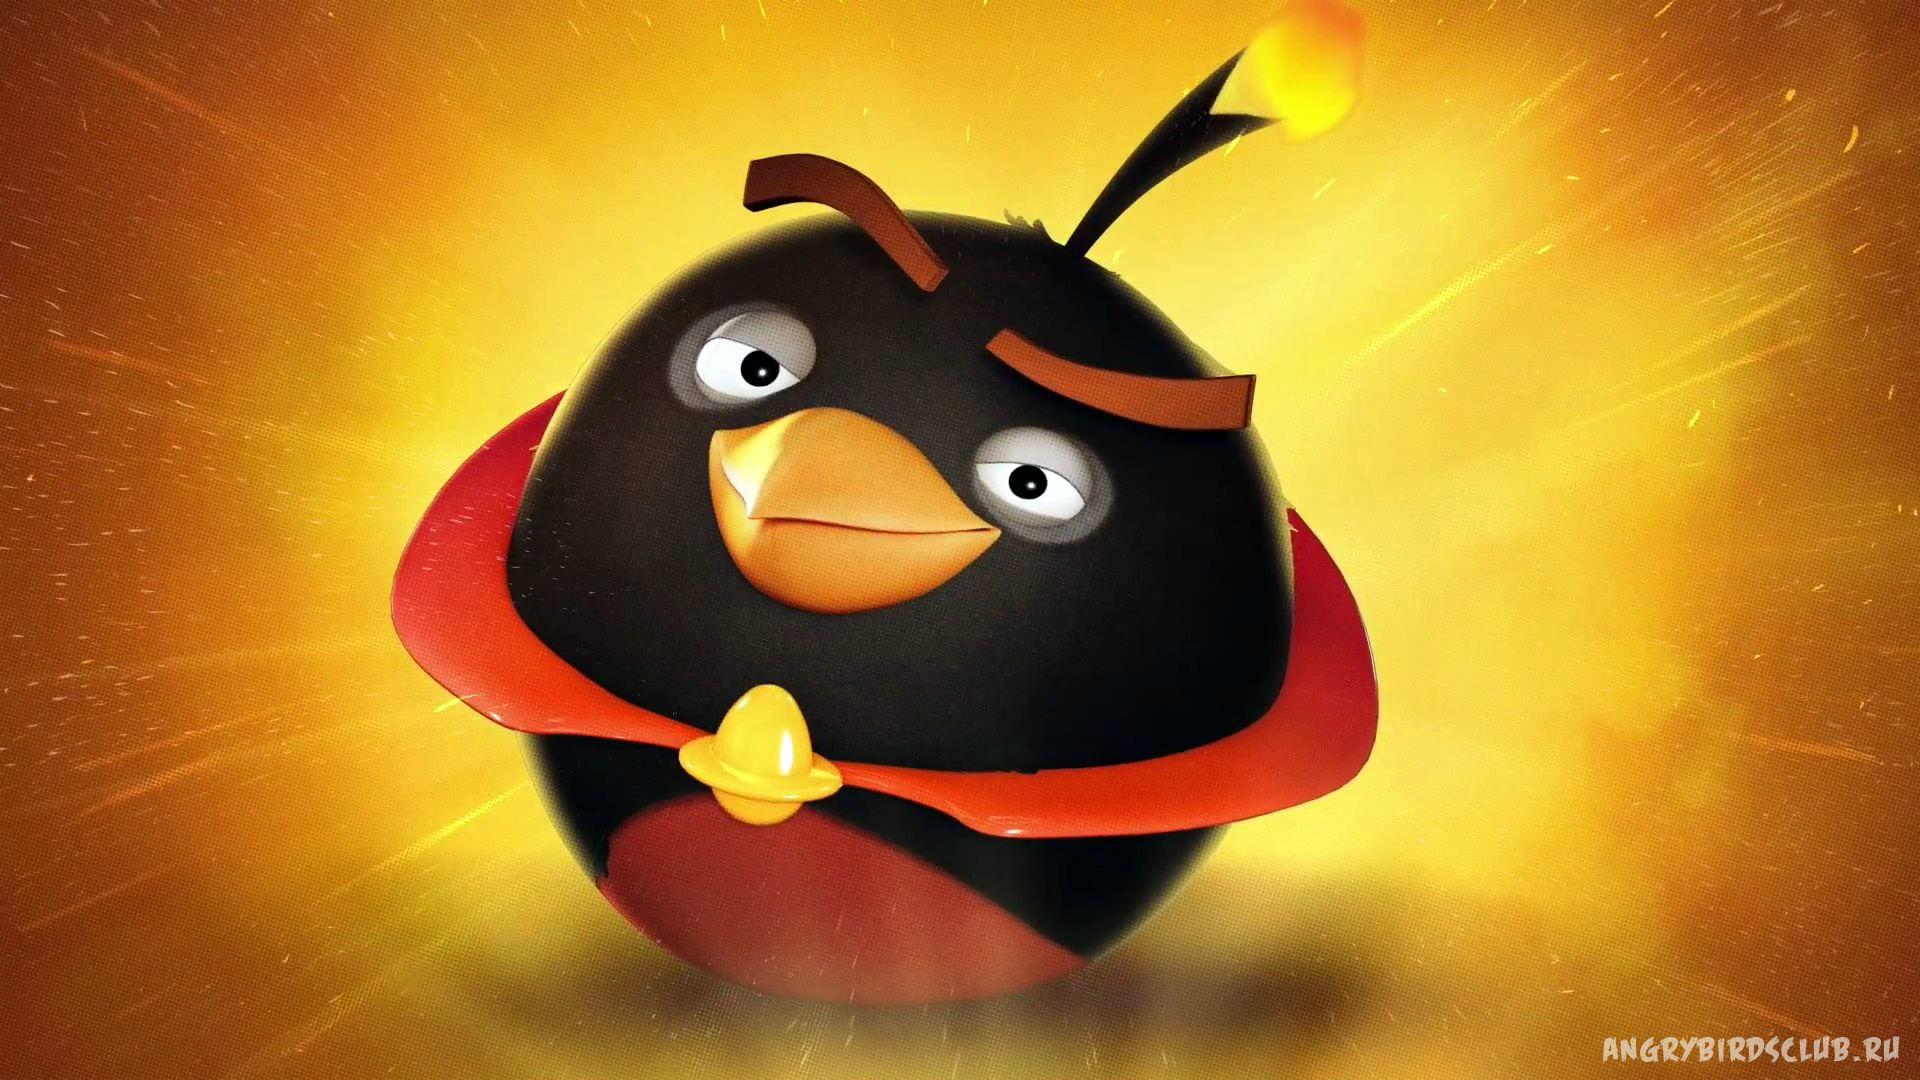 Angry Birds Bomb HD Wallpaper 26033